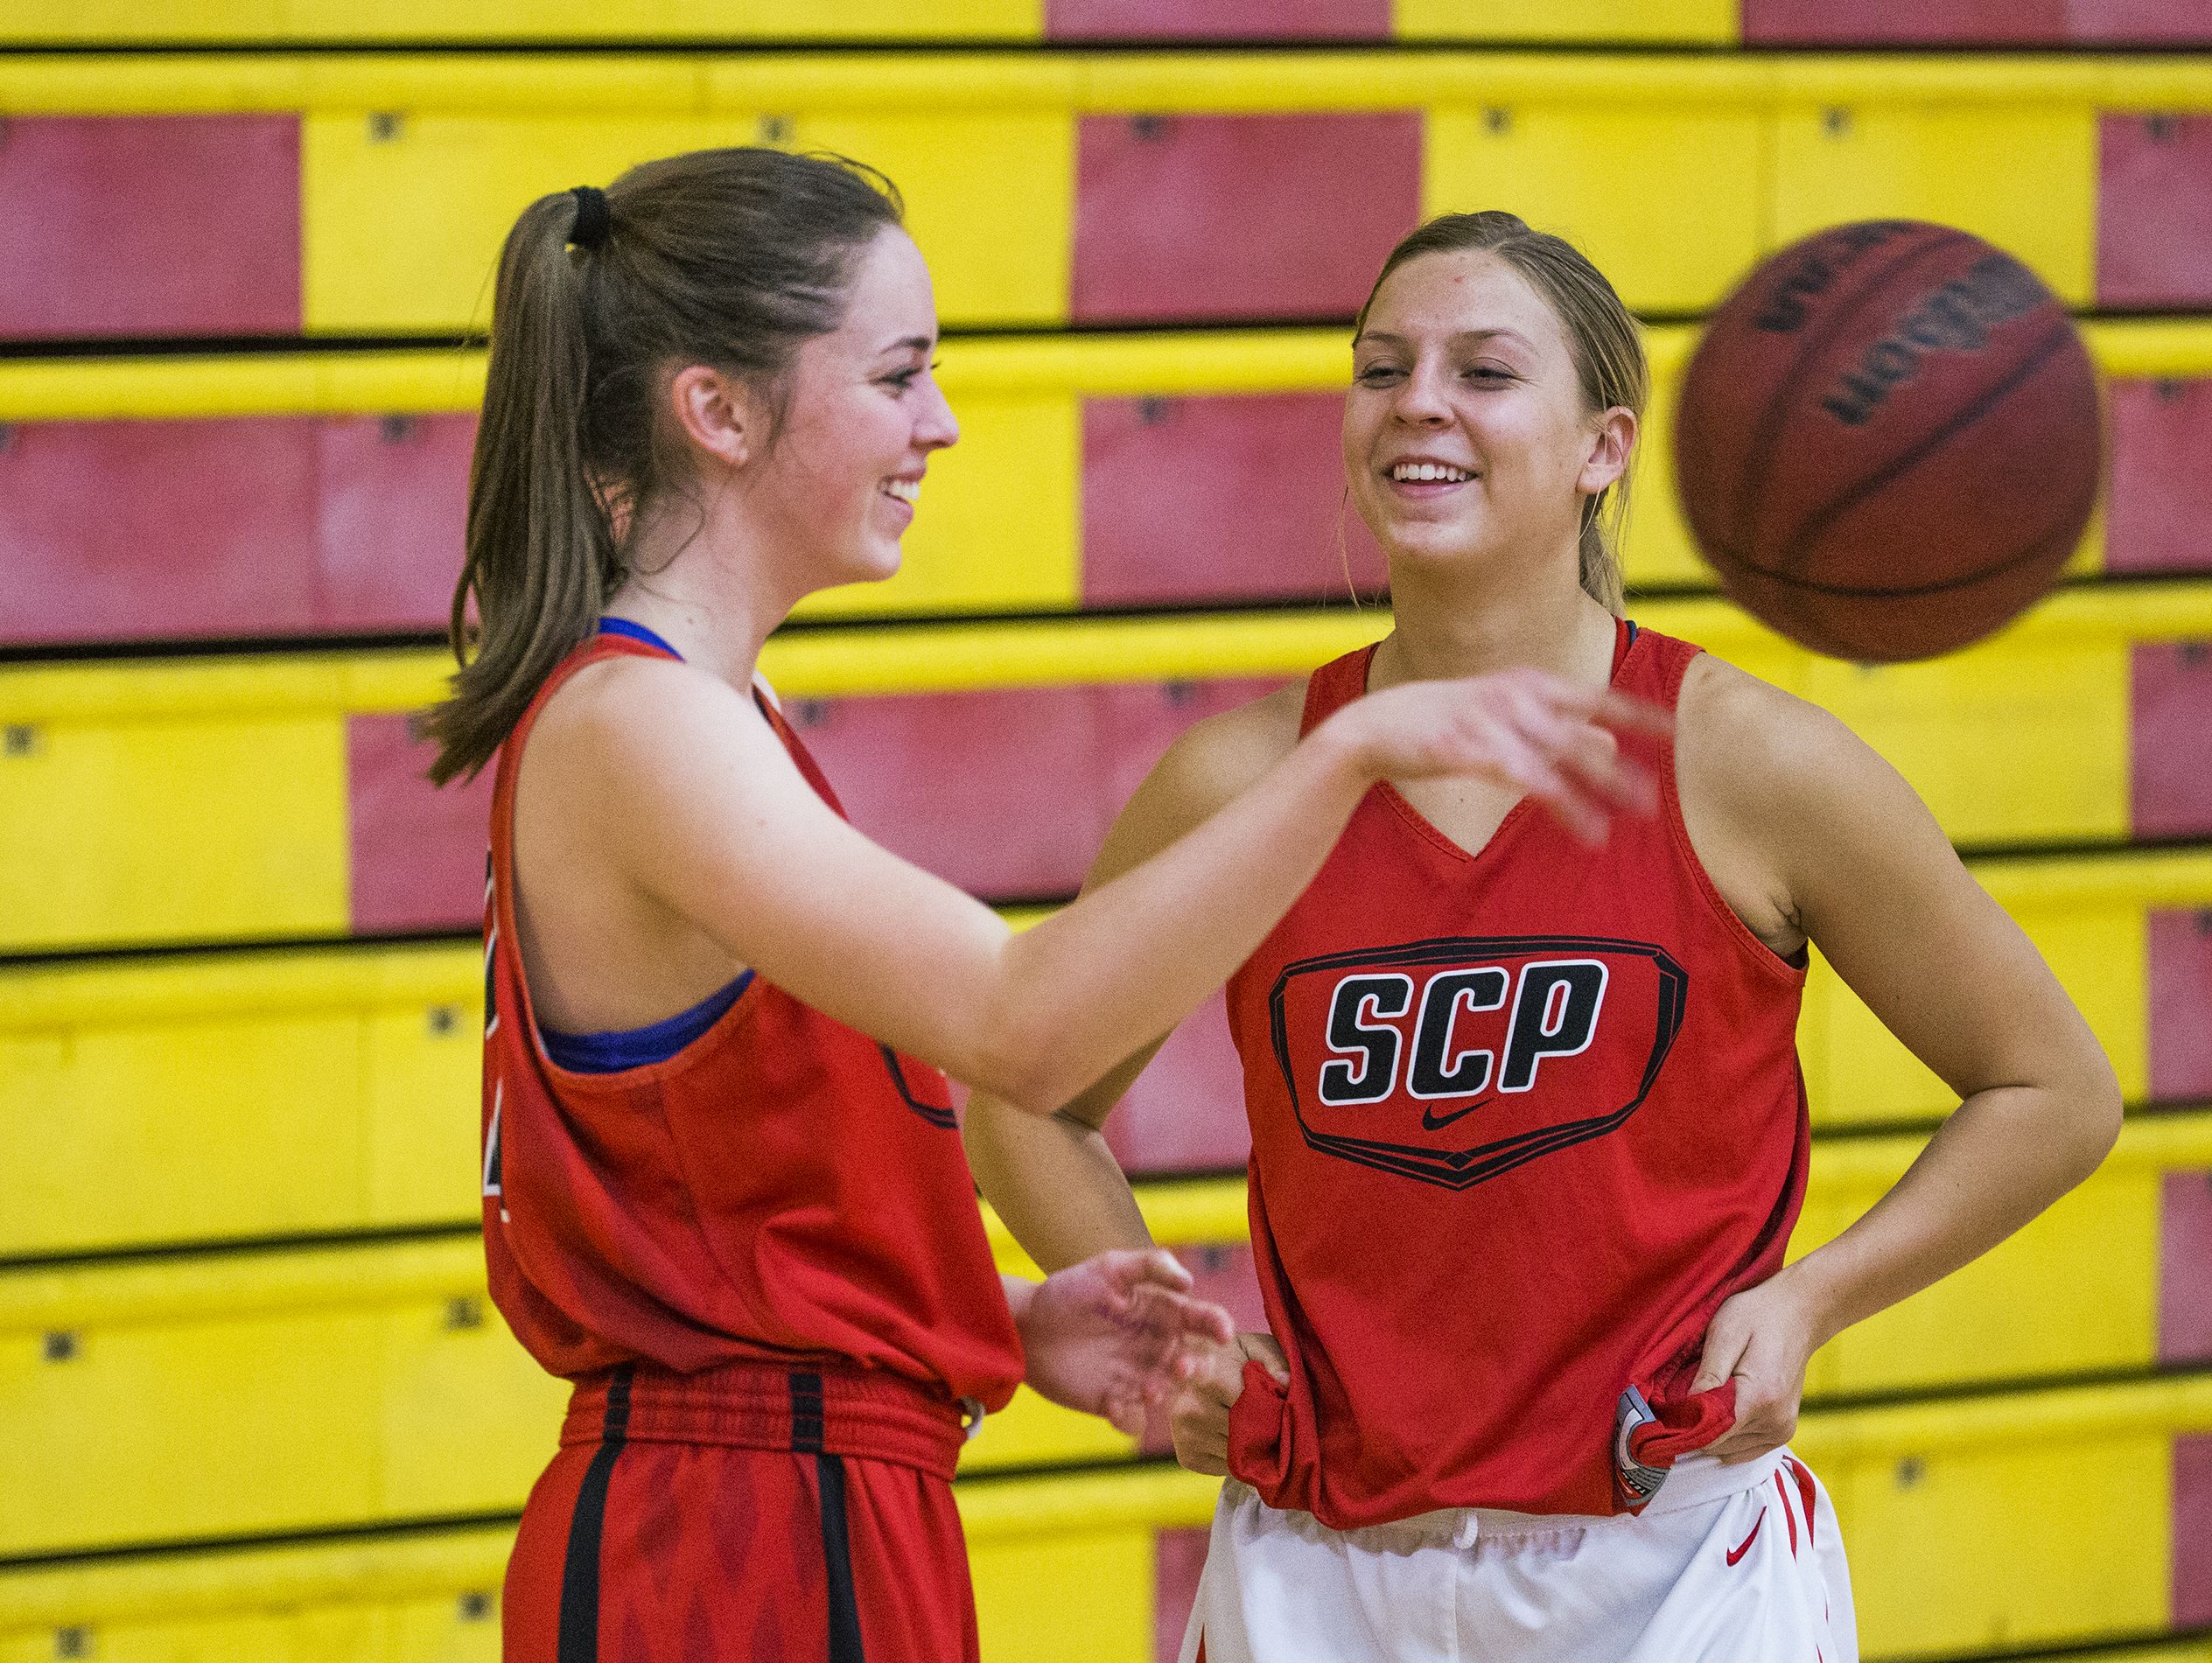 Sarah Barcello, left, and Liz Holter, of the Seton Catholic High School girls basketball team, practice with the team, November 14, 2016.